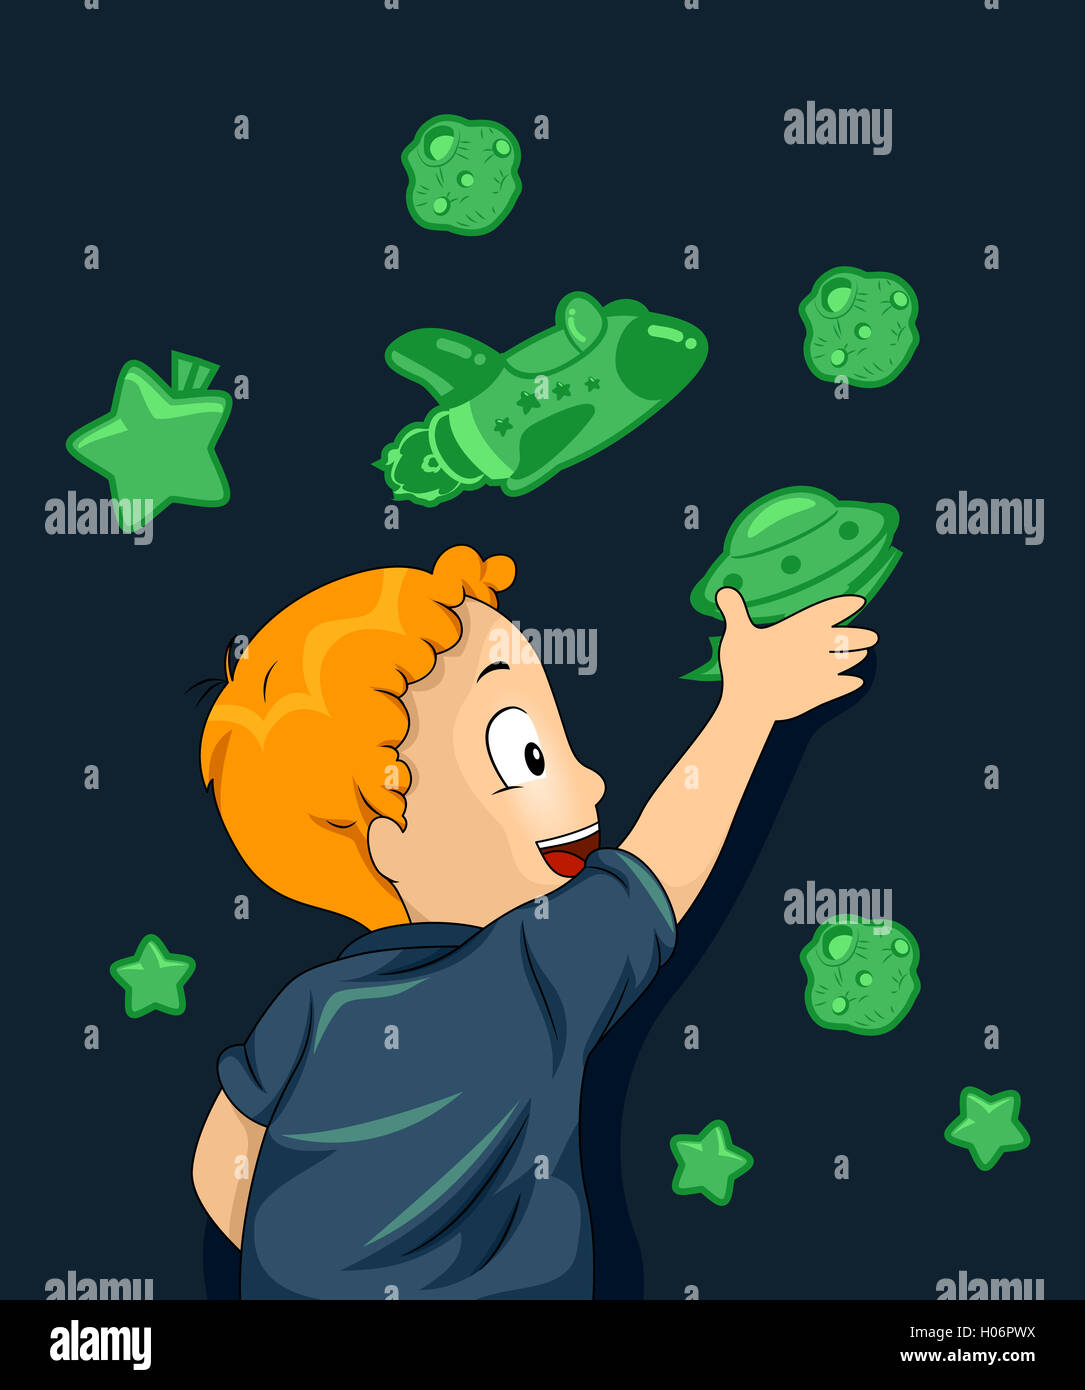 Illustration of a Boy Sticking Space Themed Glow in the Dark Stickers on His Wall Stock Photo